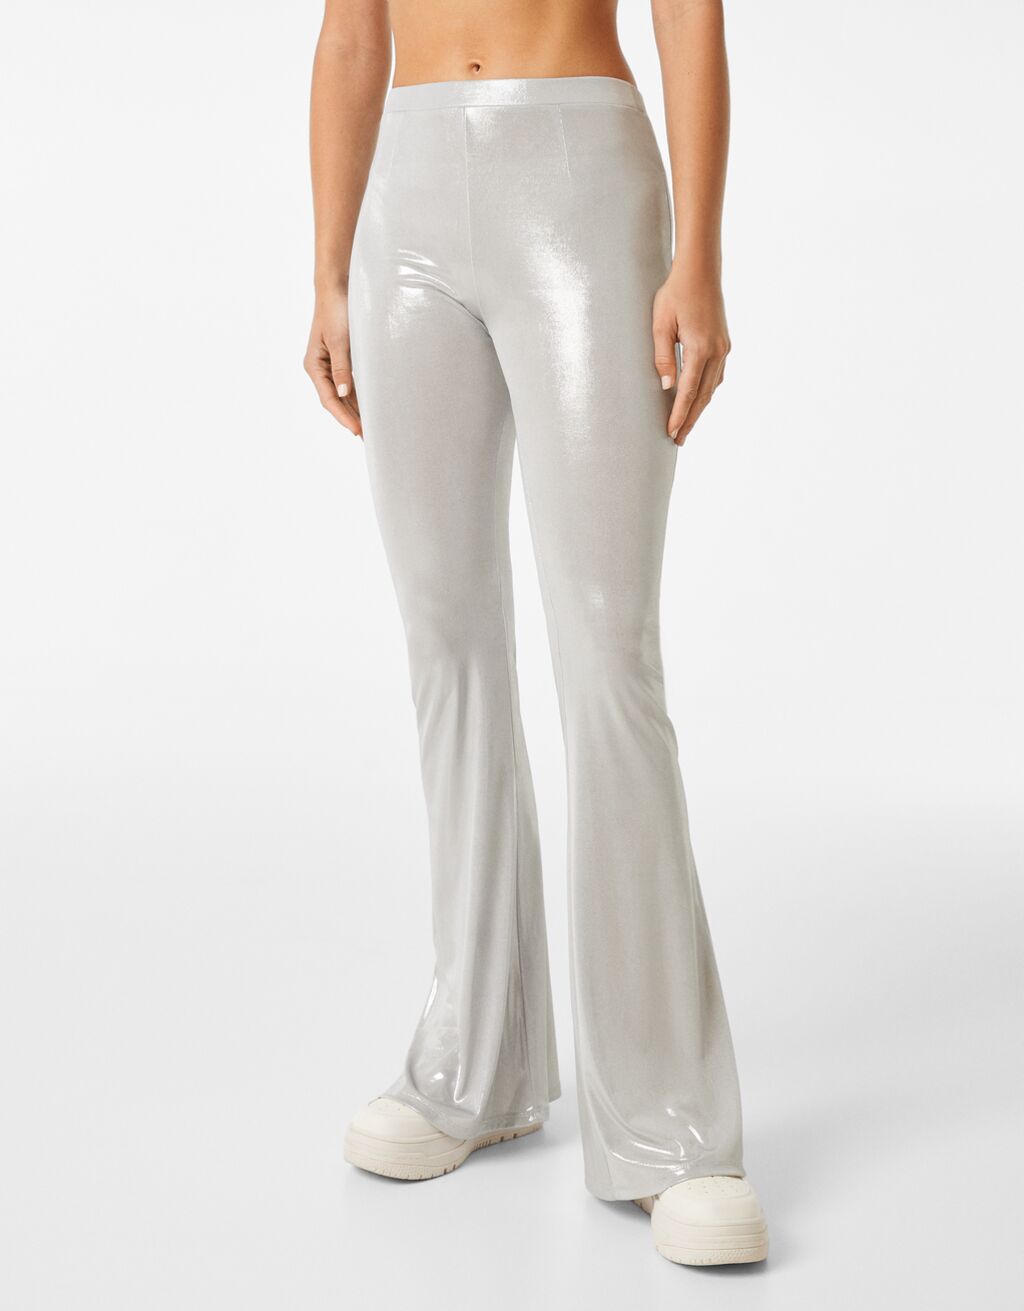 Flared silver foil pants